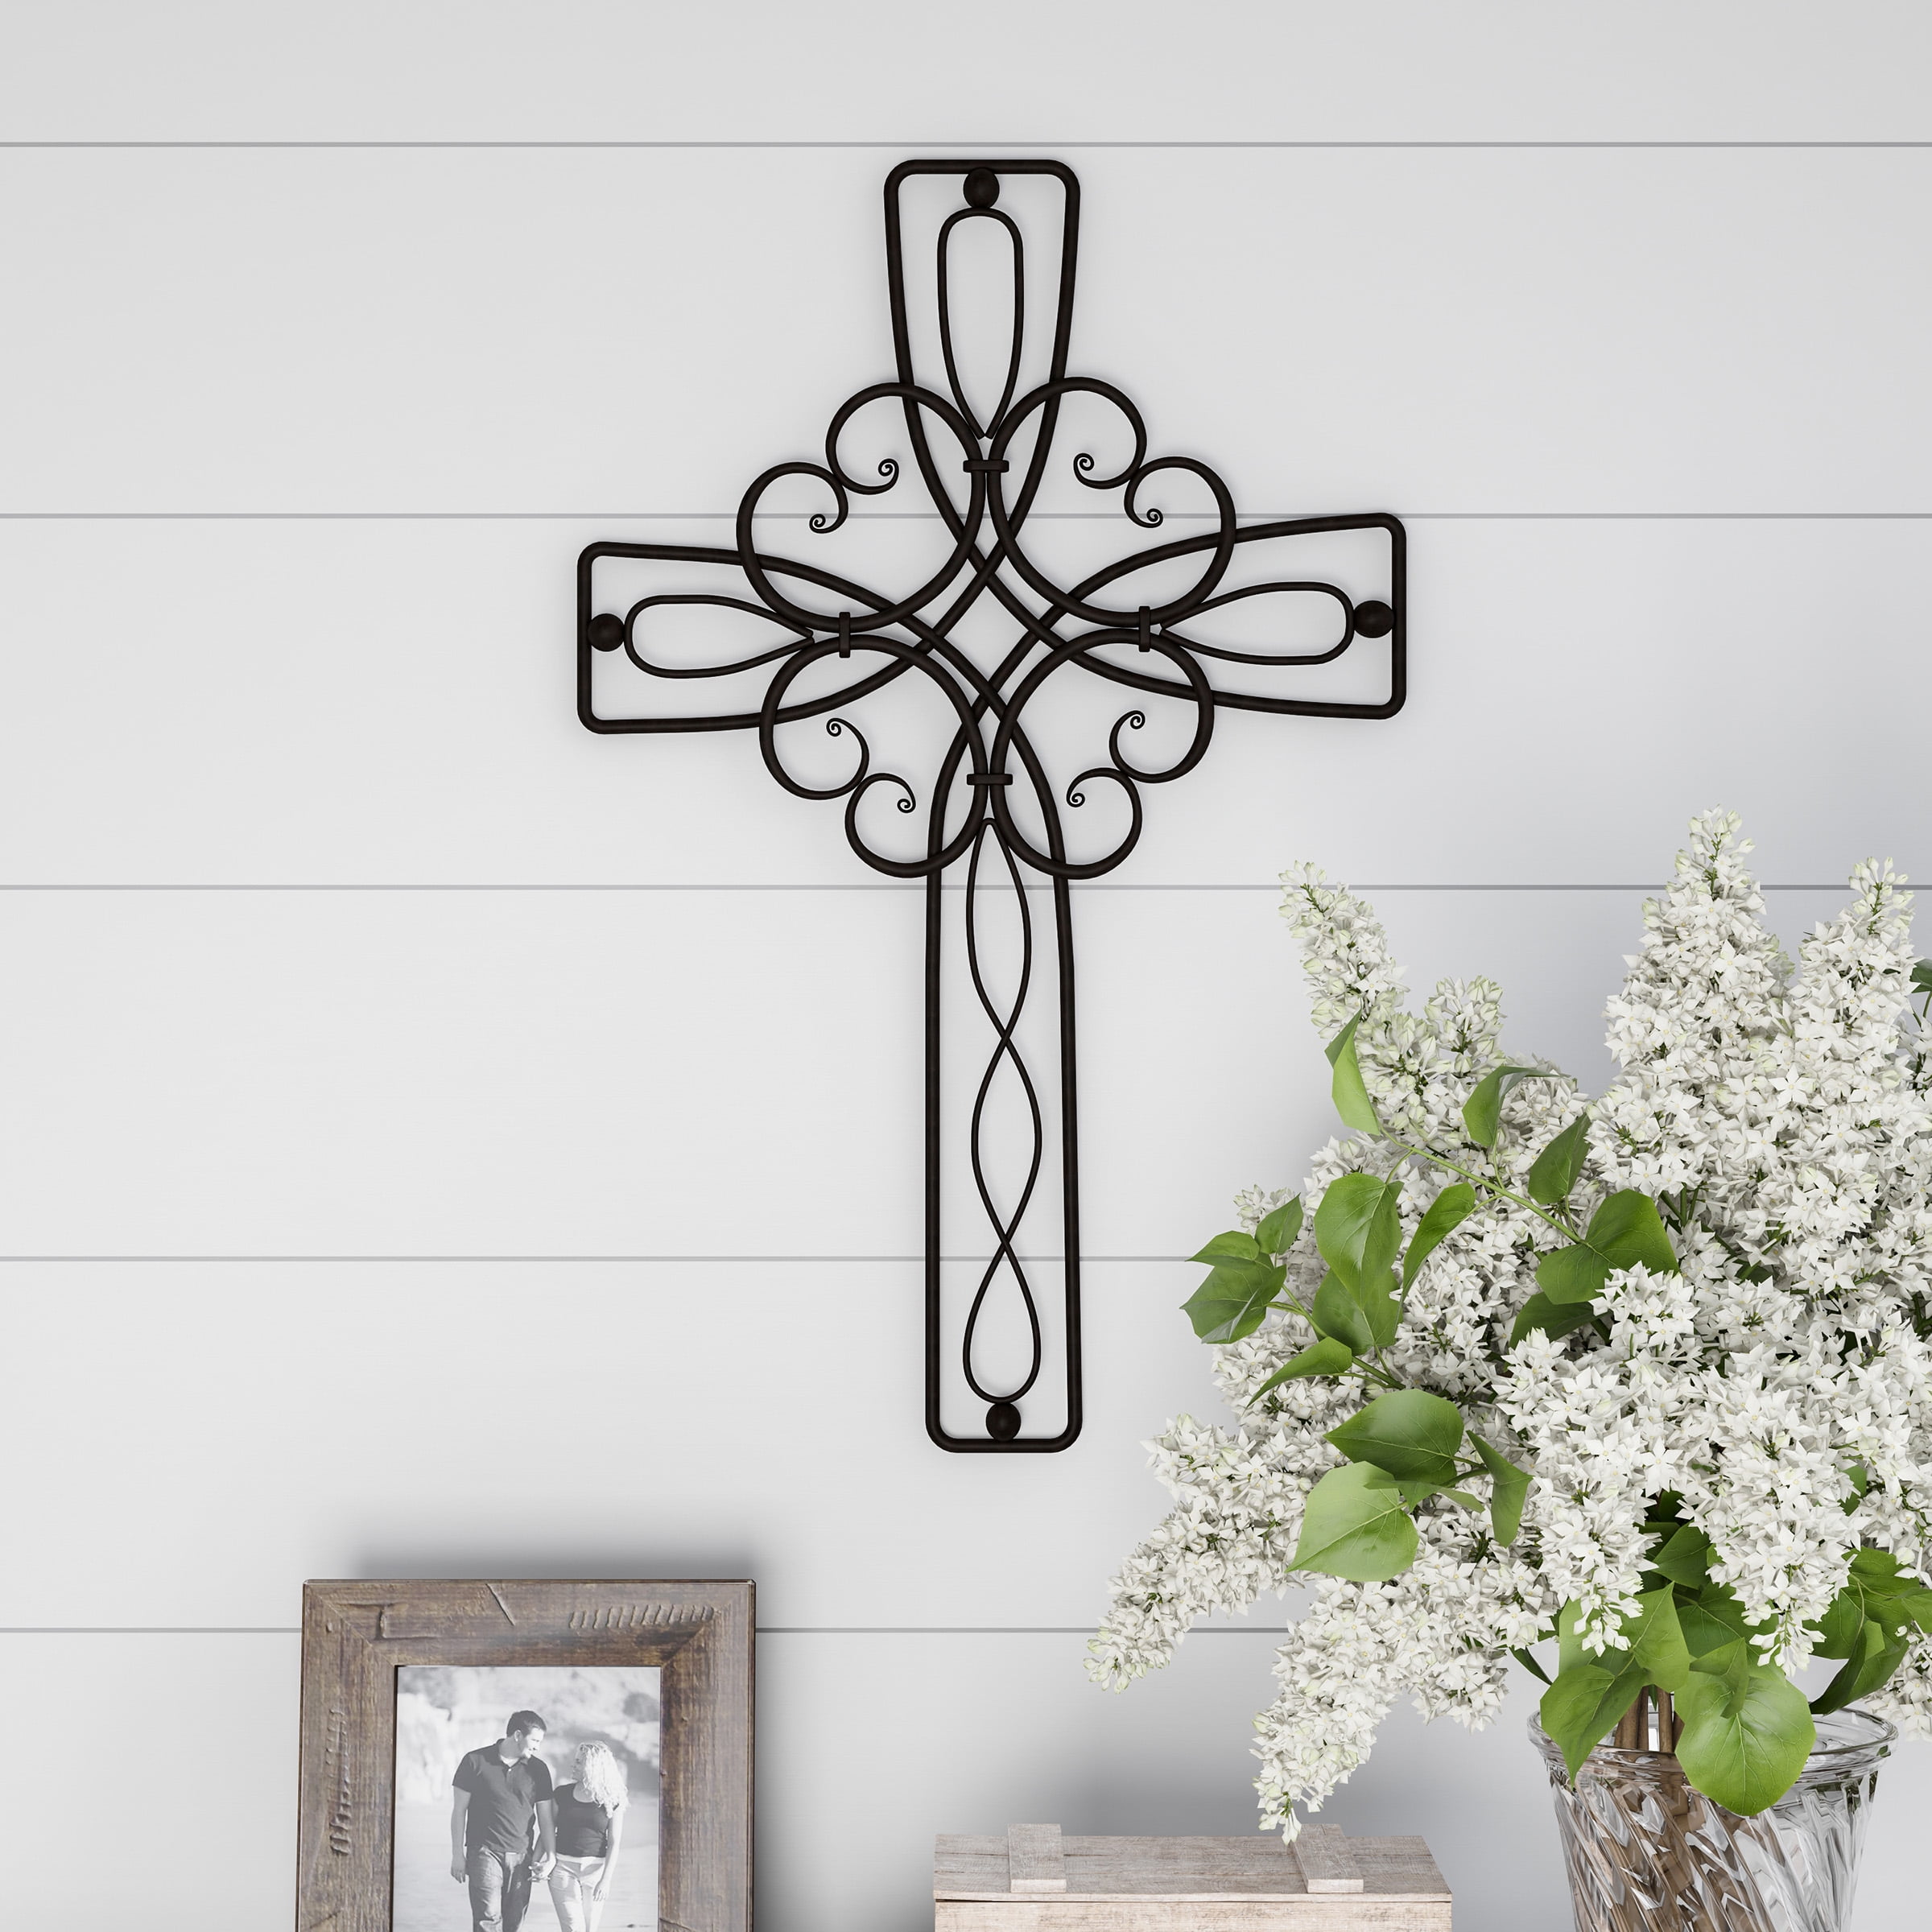 6 I Love To Collect Wall Crosses Rustic Cast Iron Hanging Crosses Home Decor Collection of 6